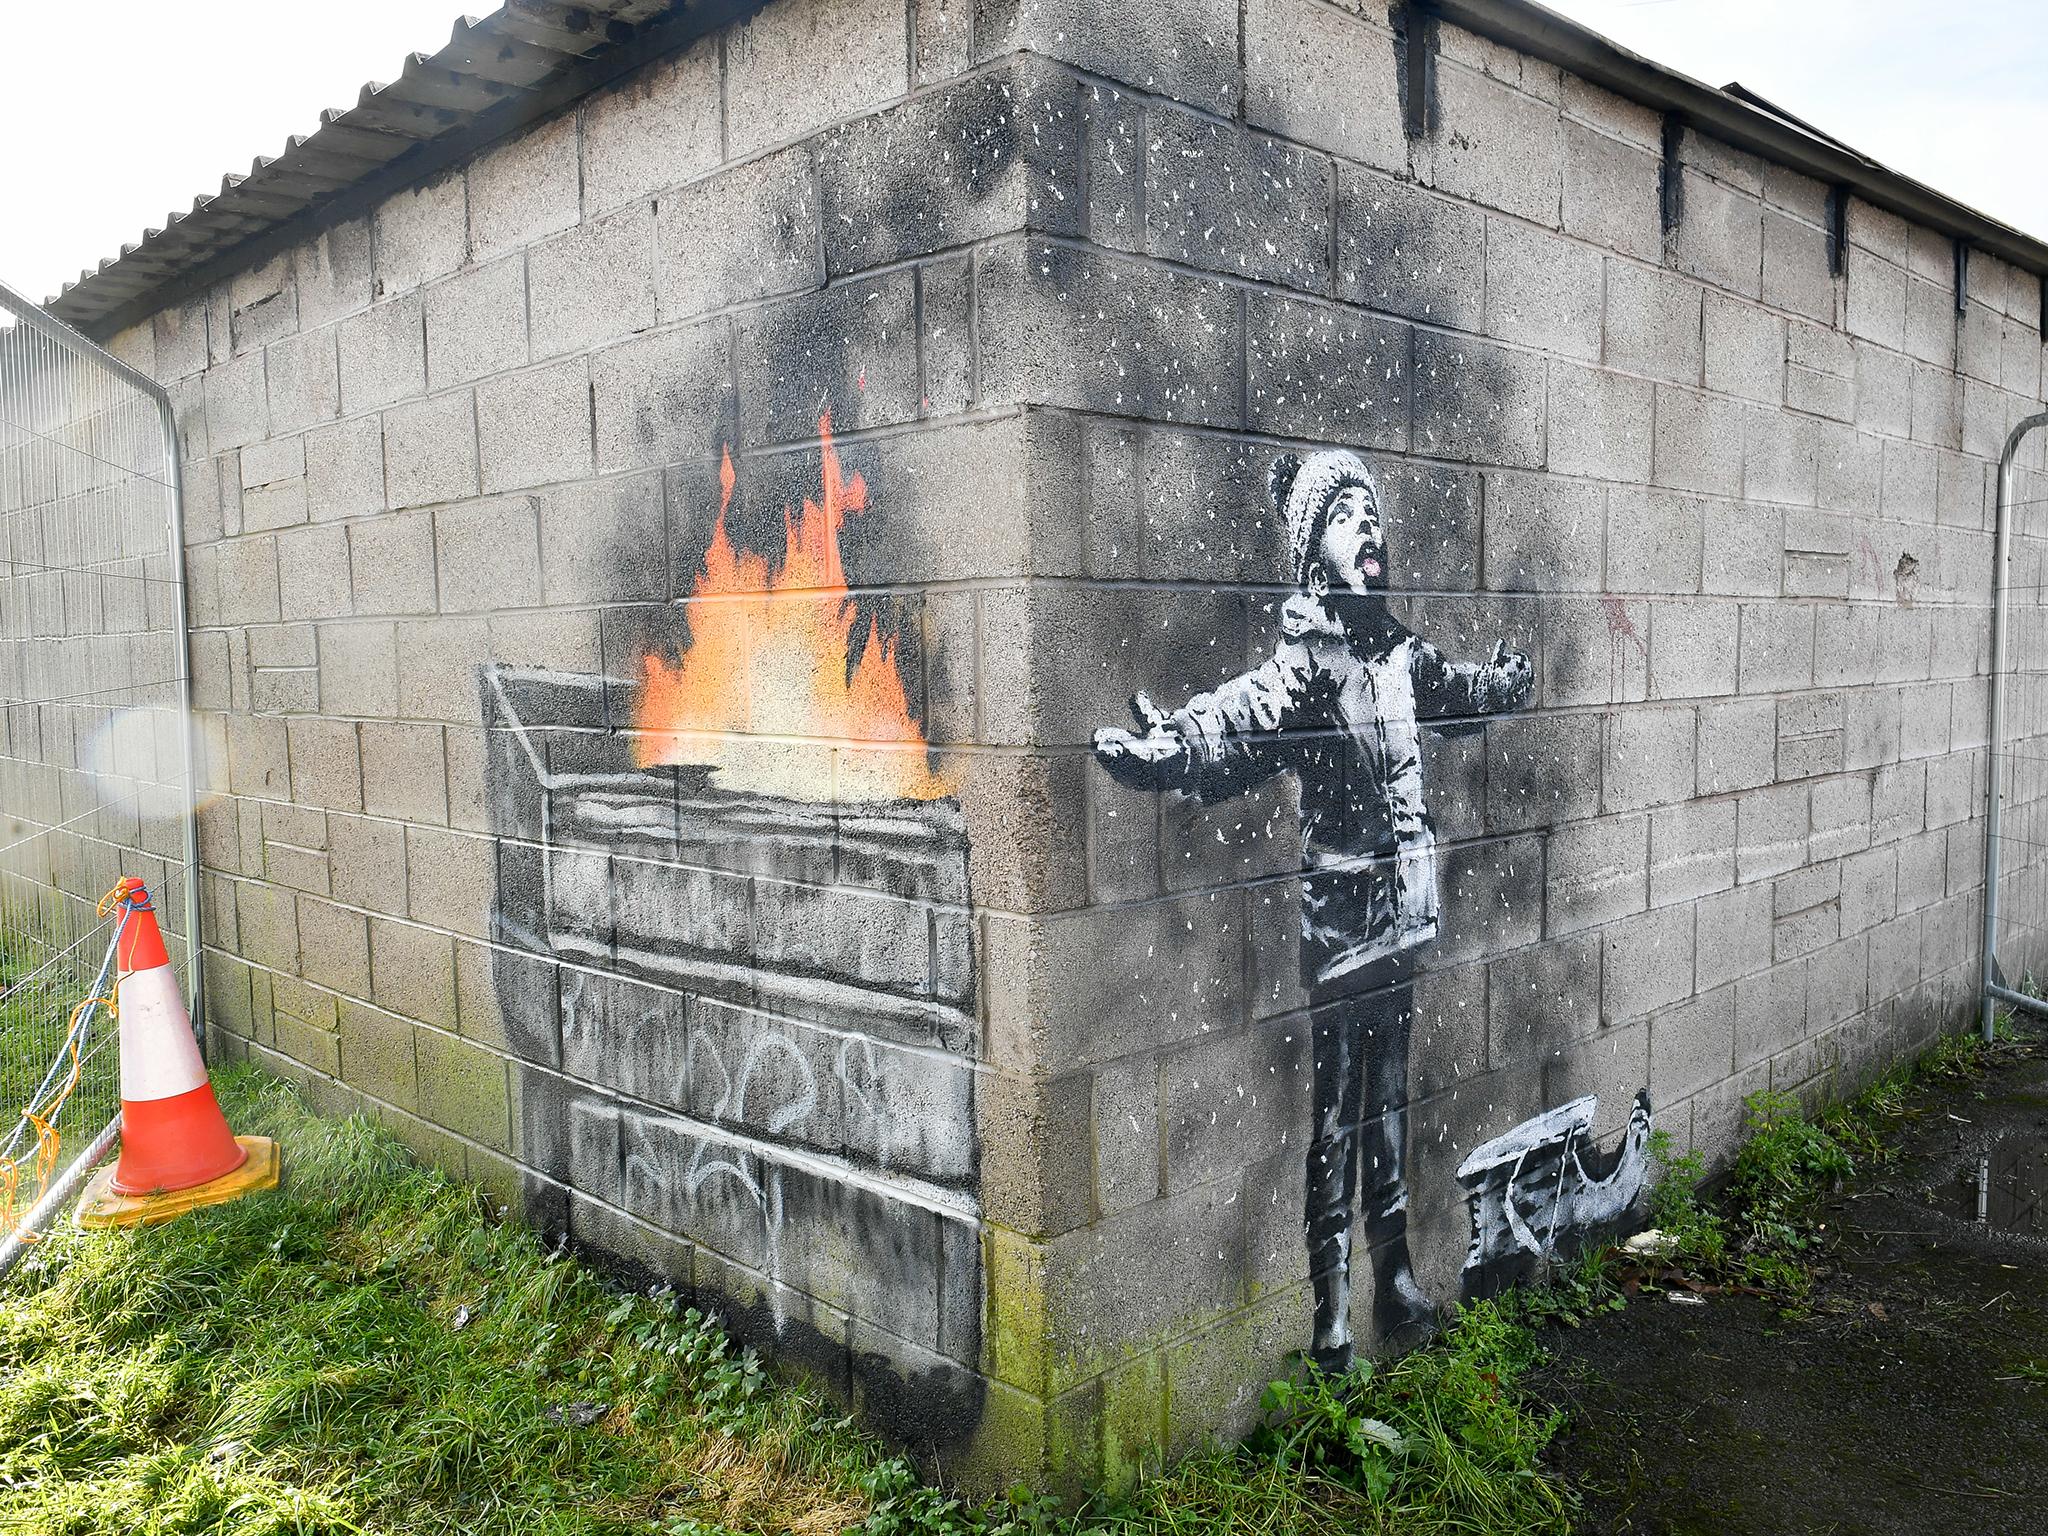 A painting by the street artist appeared on a garage wall in south Wales in December